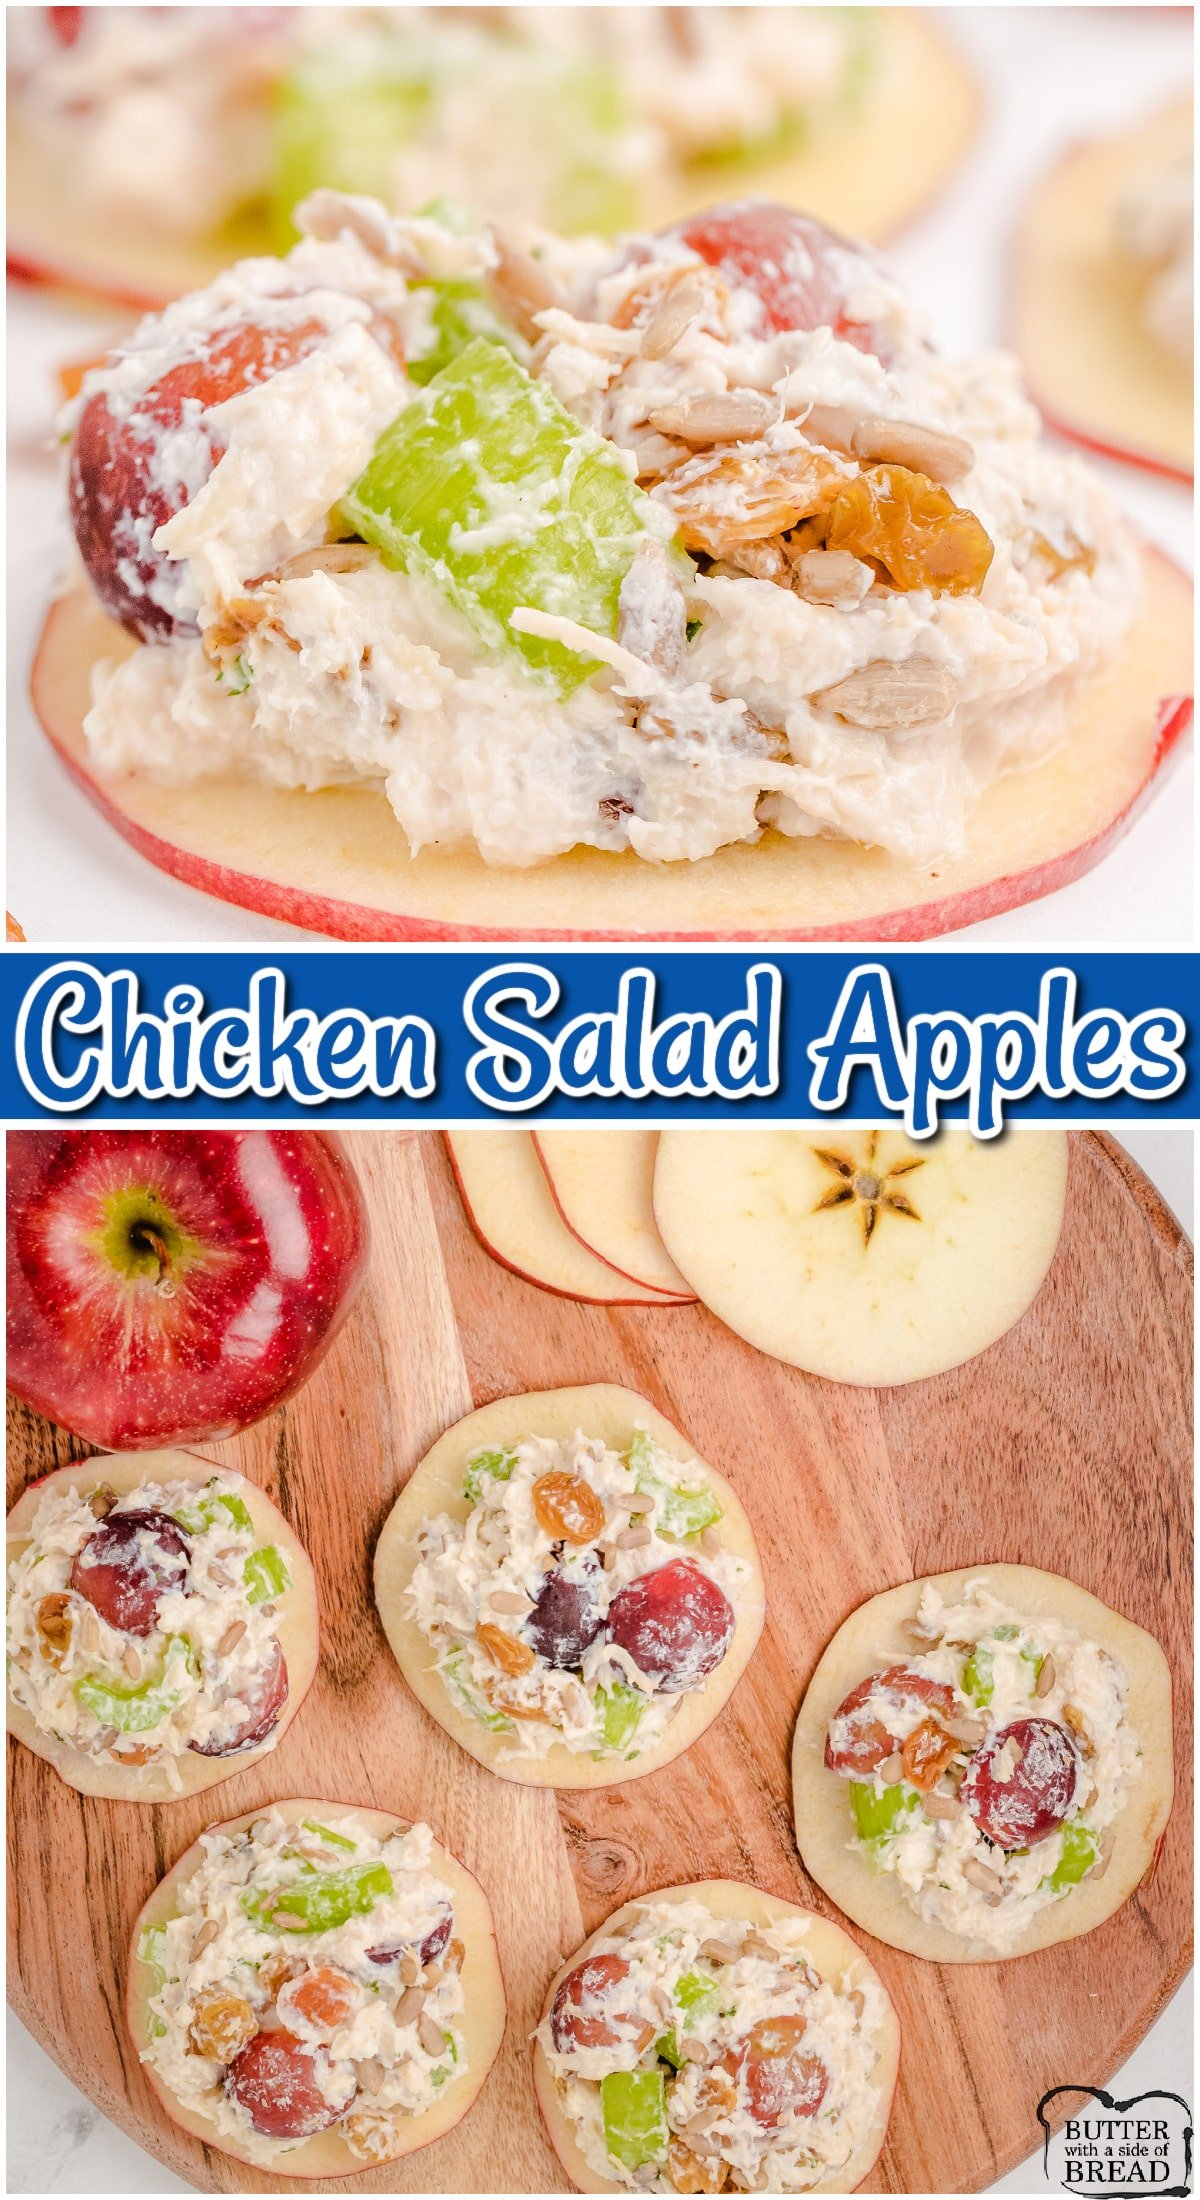 Enjoy this delightful, creamy, grape and celery packed, chicken salad on top of your favorite apples. Sweet, savory, maybe a little tangy, all come together in this tasty snack! 